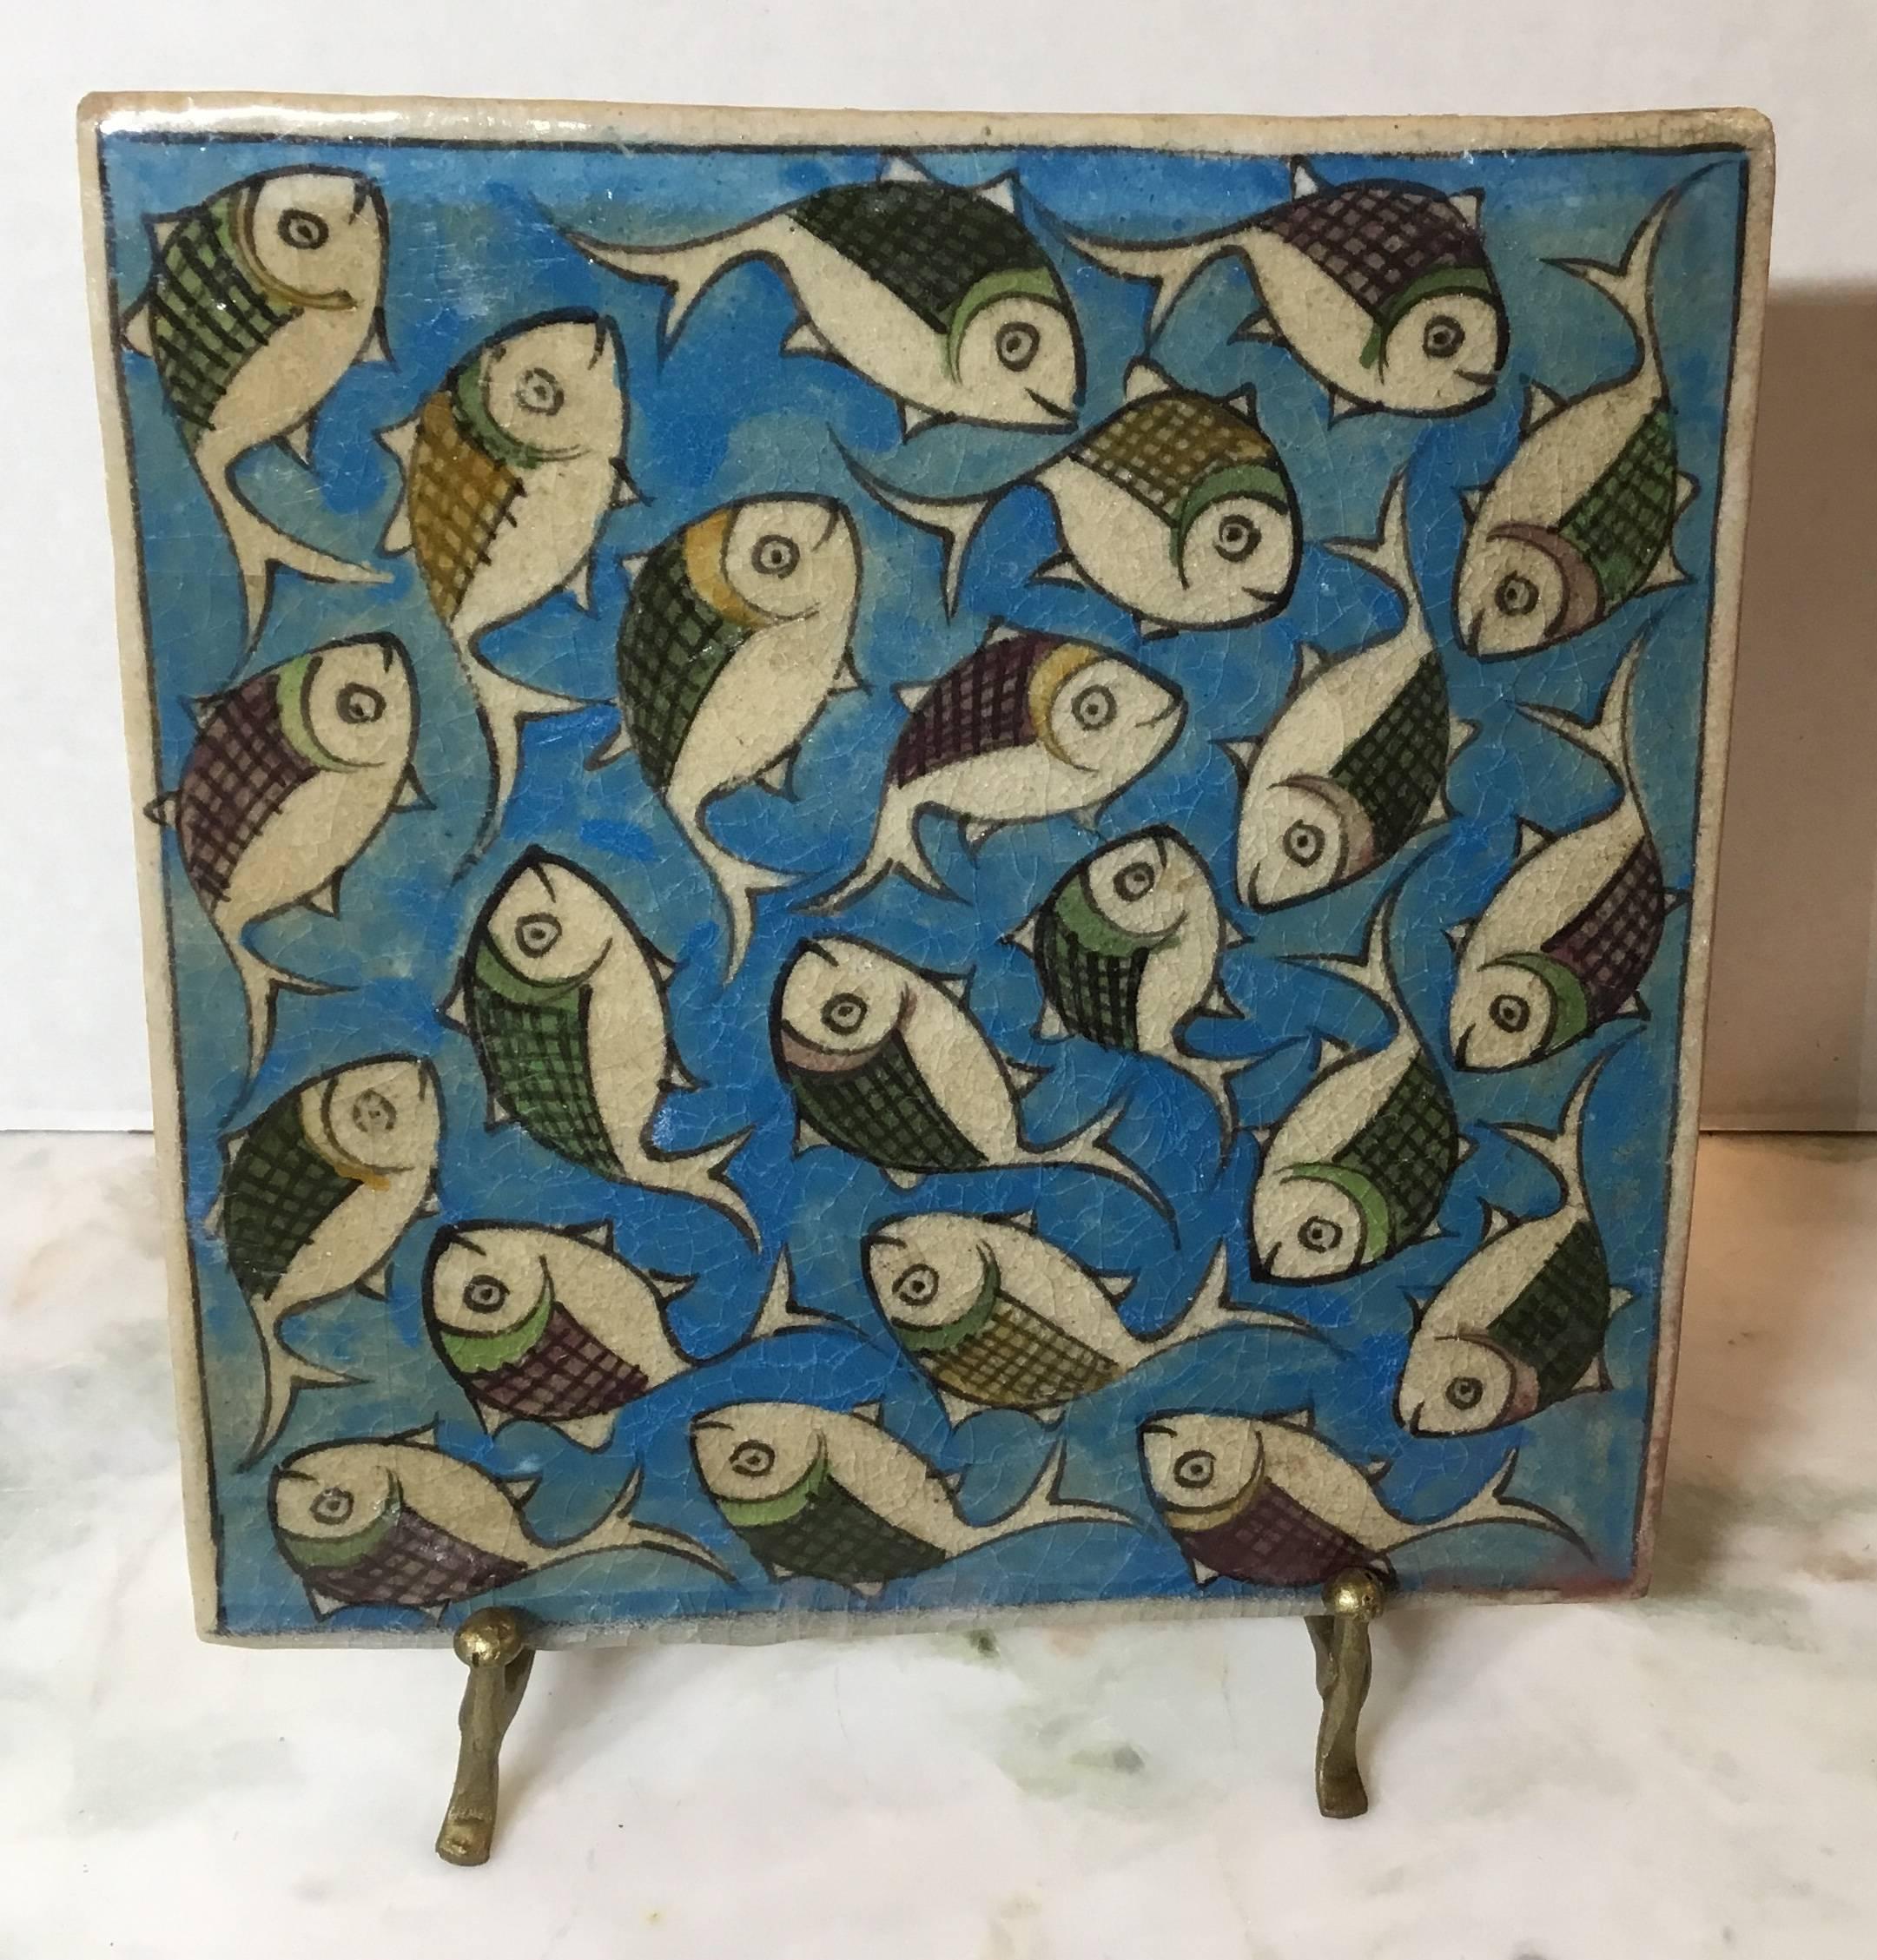 Beautiful Persian tile hand-painted and glazed with exceptional wondering school of colorful fish on a turquoise color background.
The tile can hang on the wall, or display on custom made iron stand.
Display piece included.